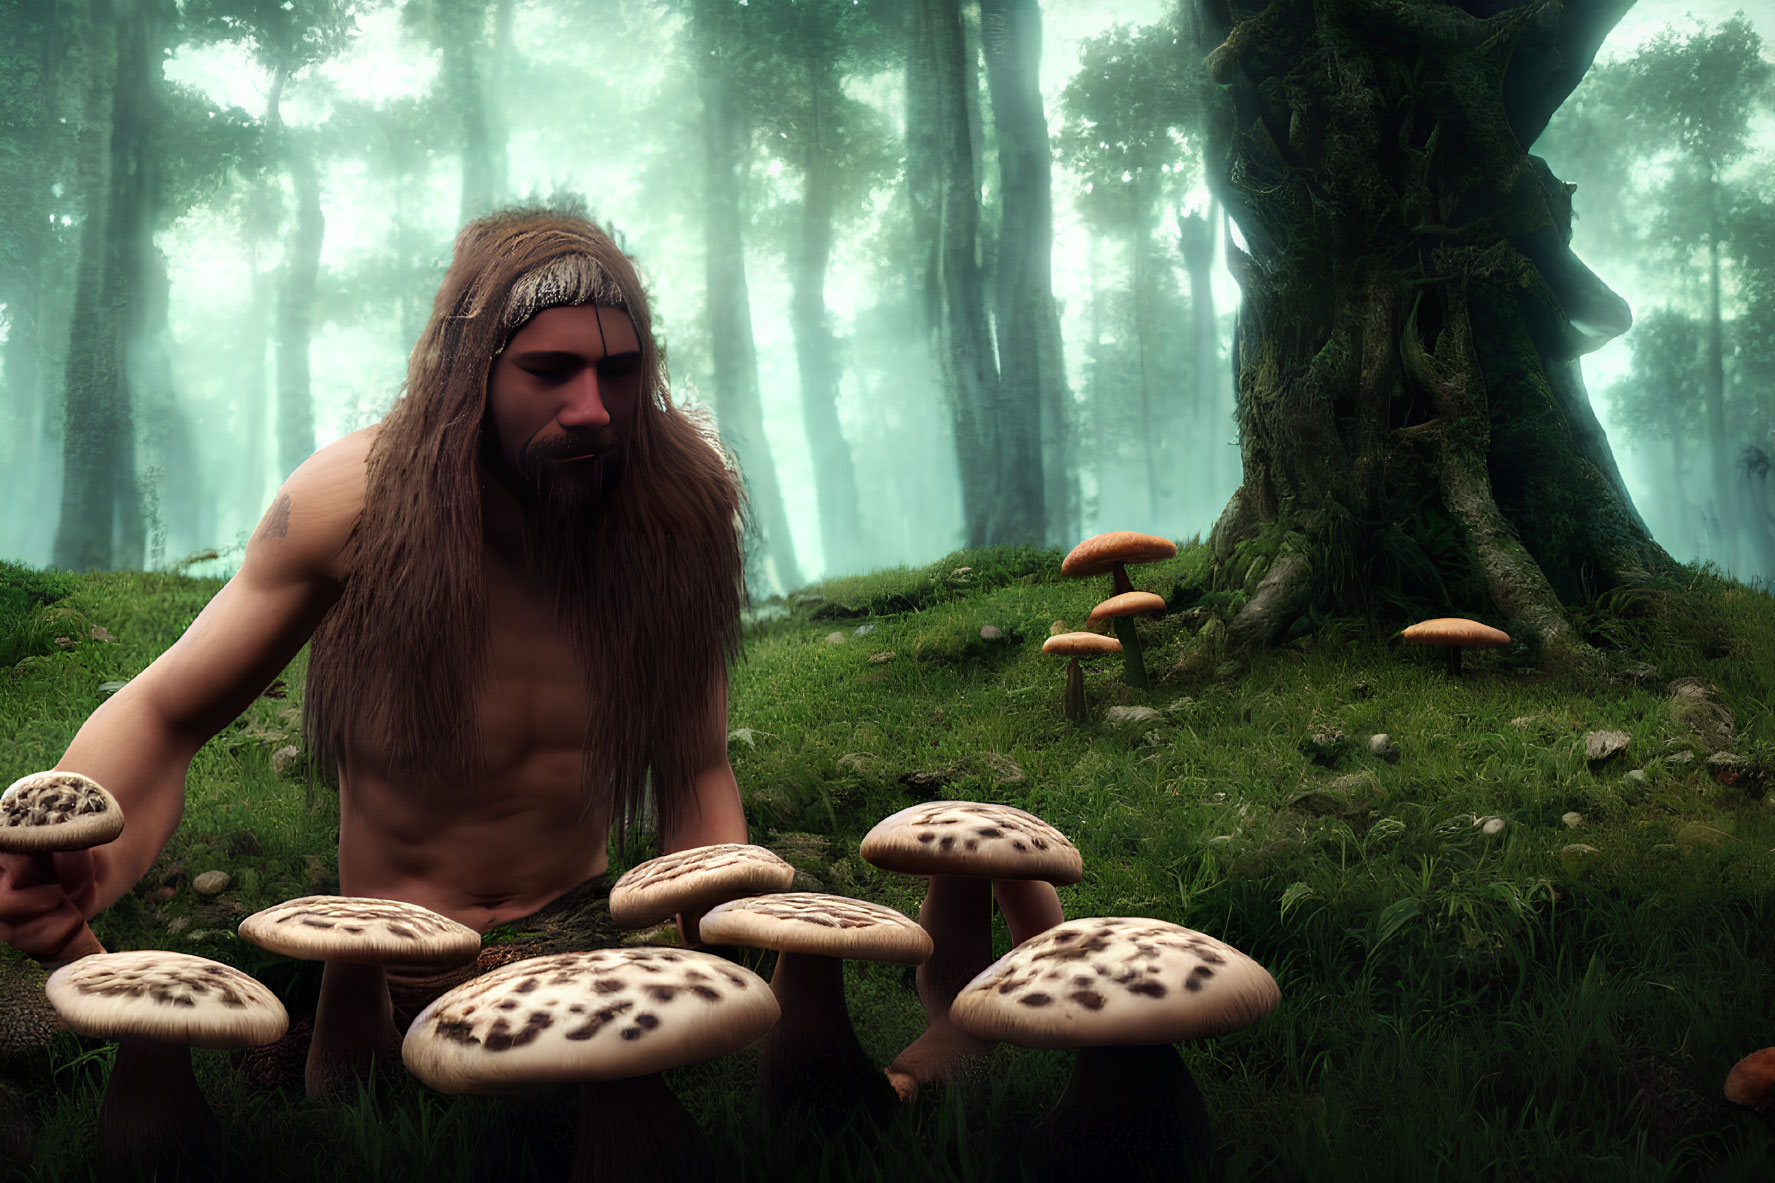 Bearded man foraging large spotted mushrooms in misty forest